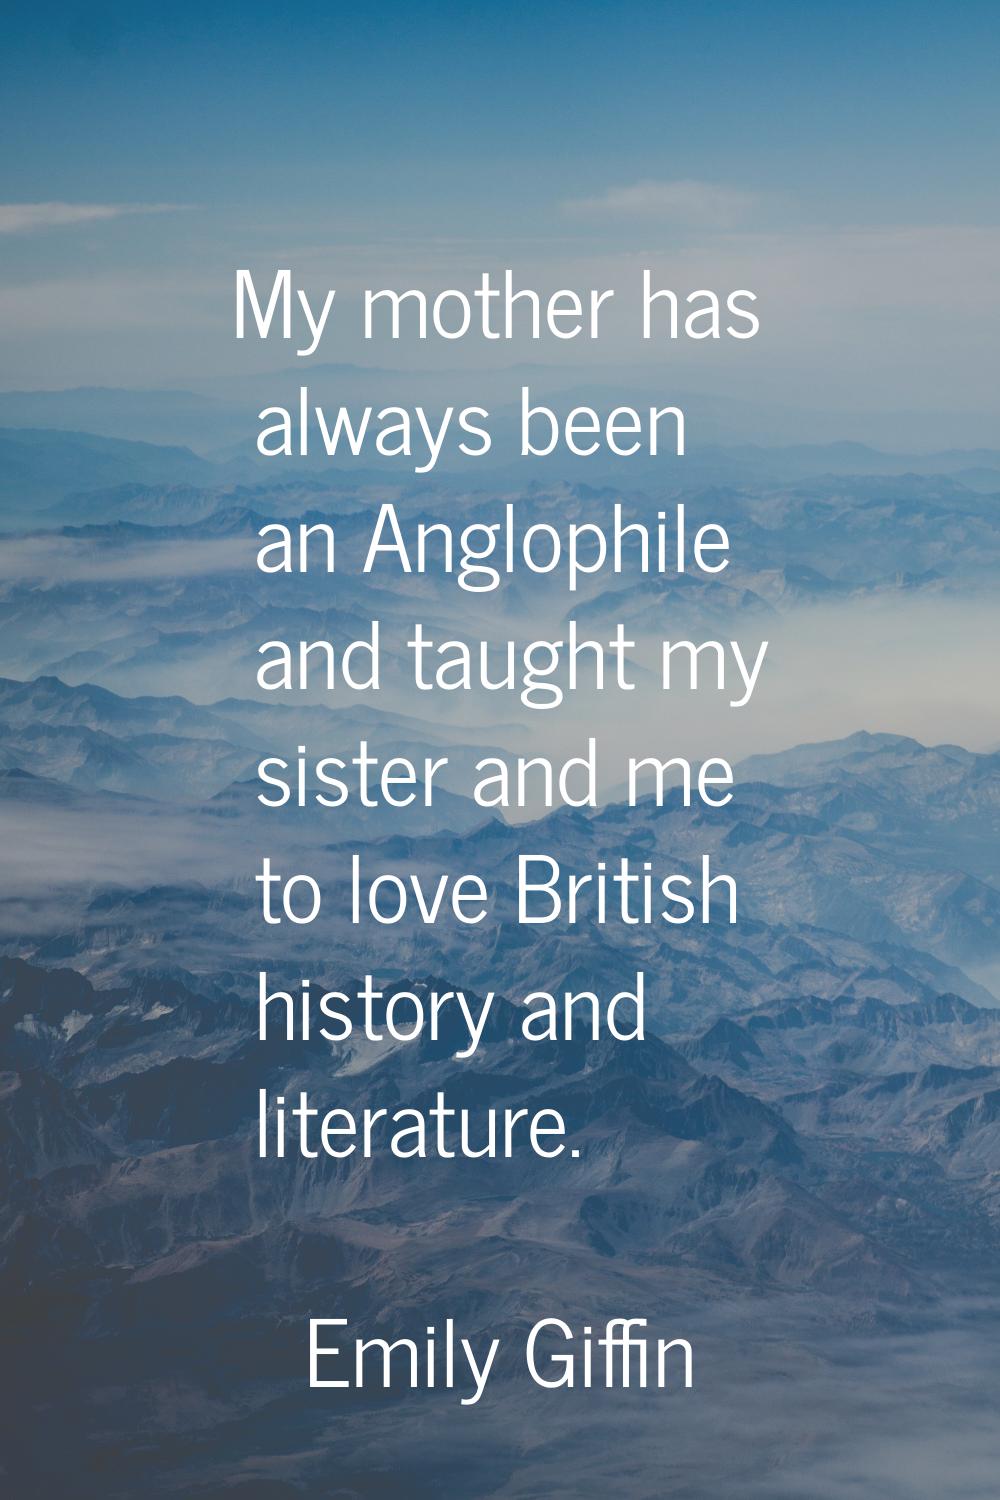 My mother has always been an Anglophile and taught my sister and me to love British history and lit